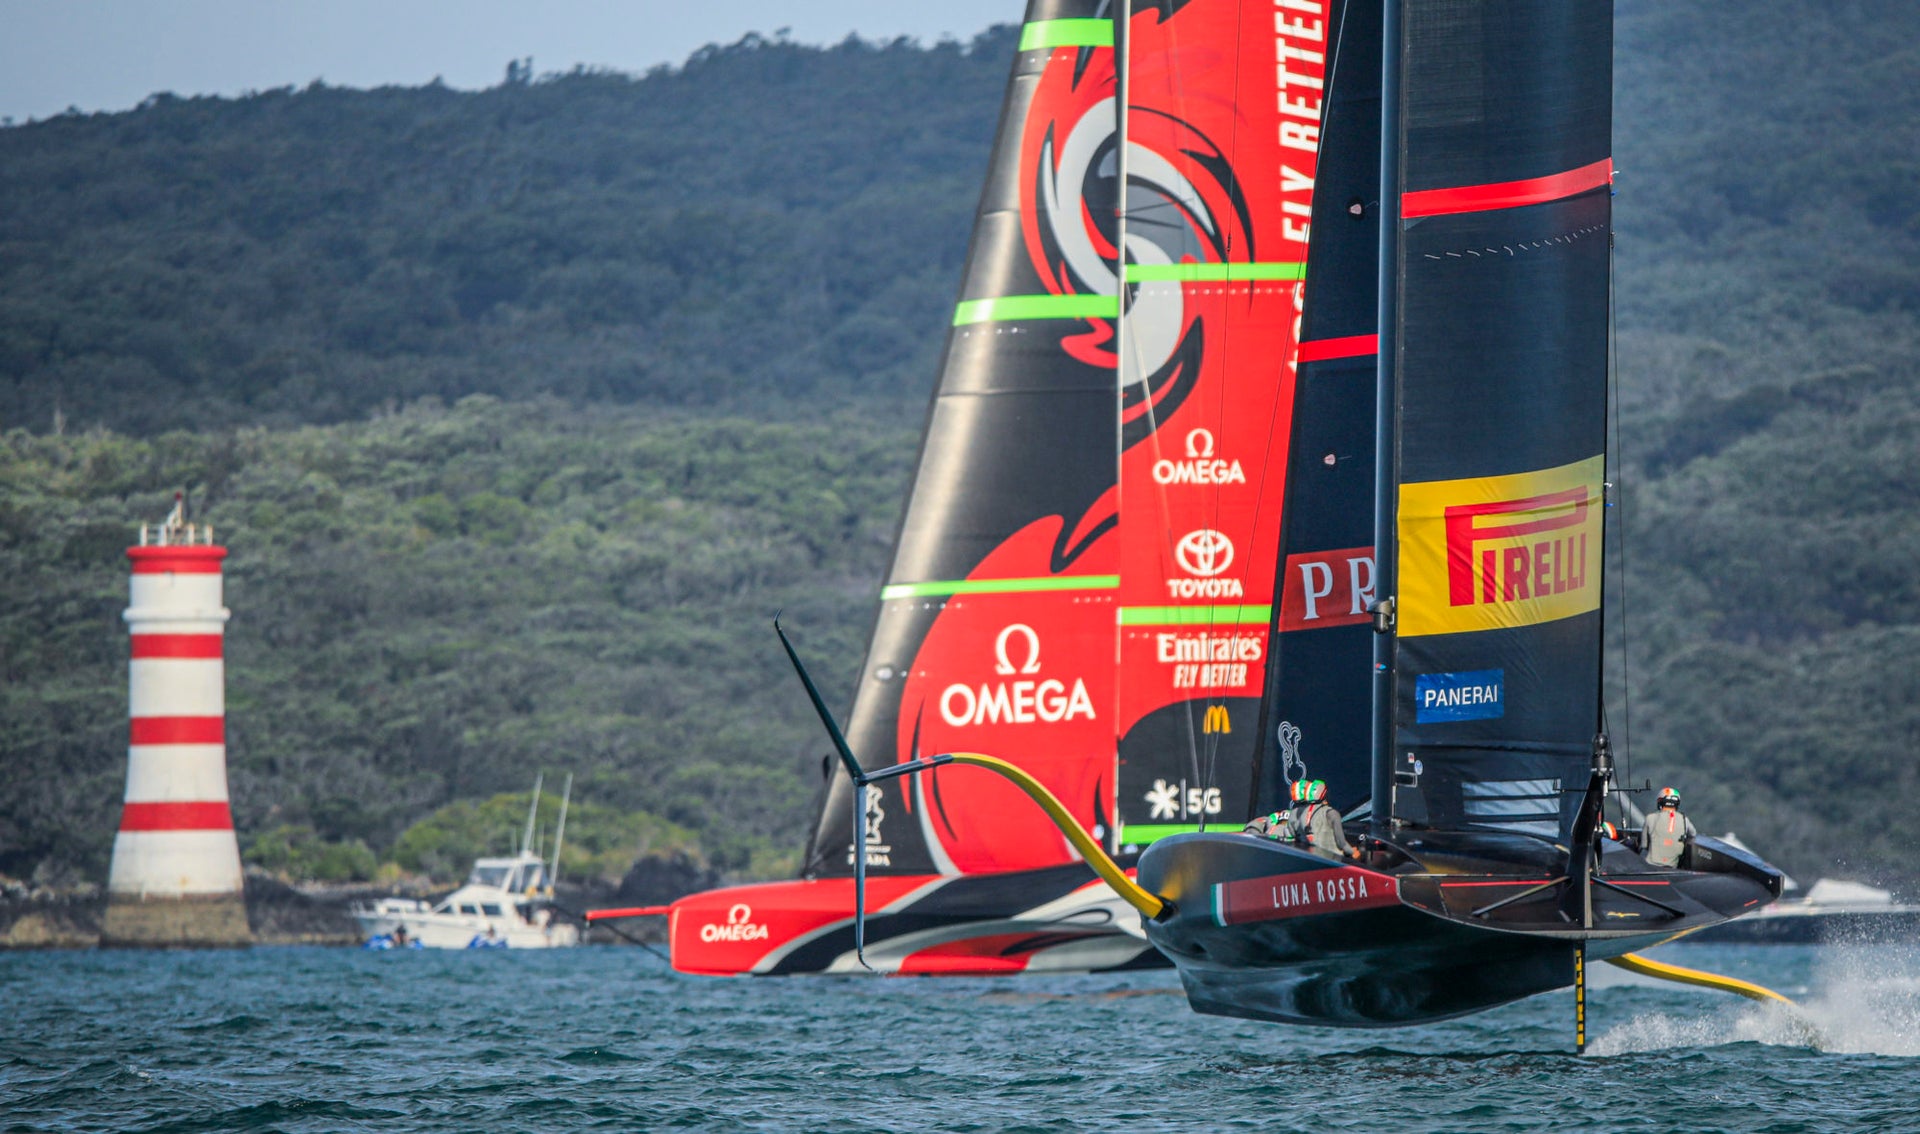 KEEPING SECRETS AT THE 36TH AMERICA’S CUP